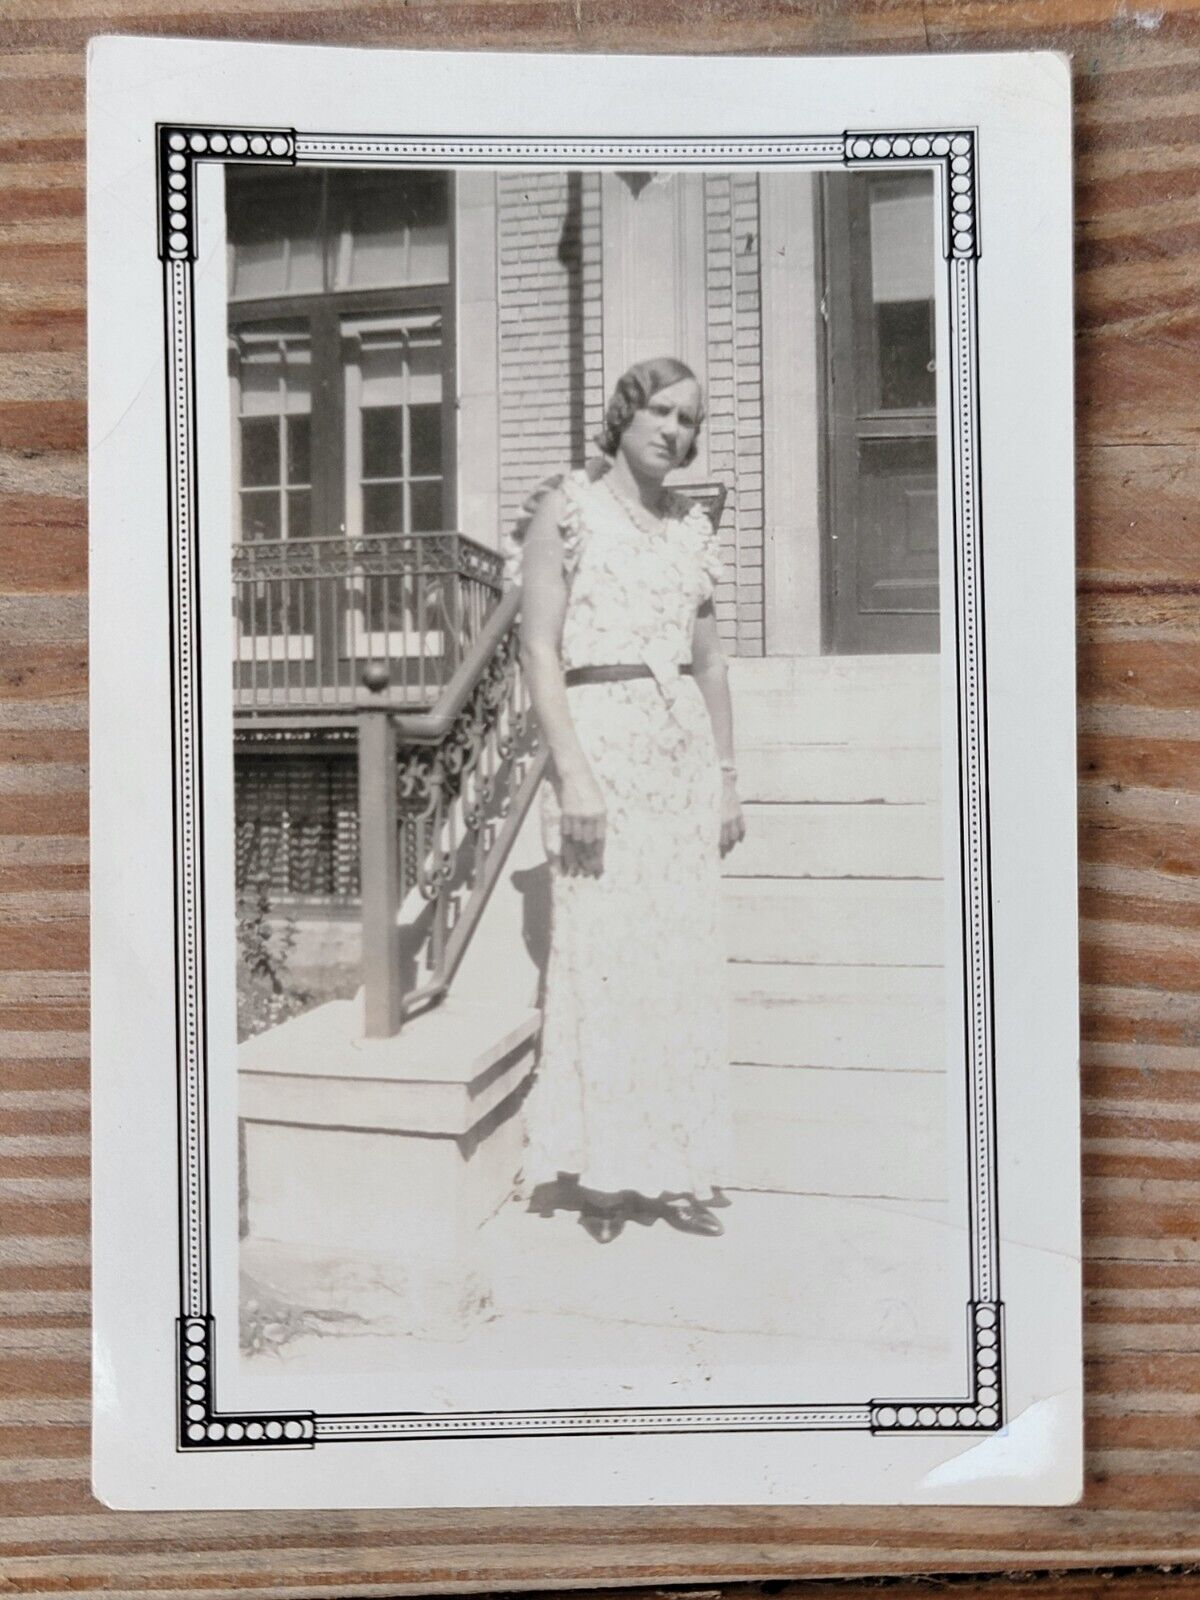 1930s Vintage Photo Snapshot Woman In White Frilly Dress On stairs Portrait